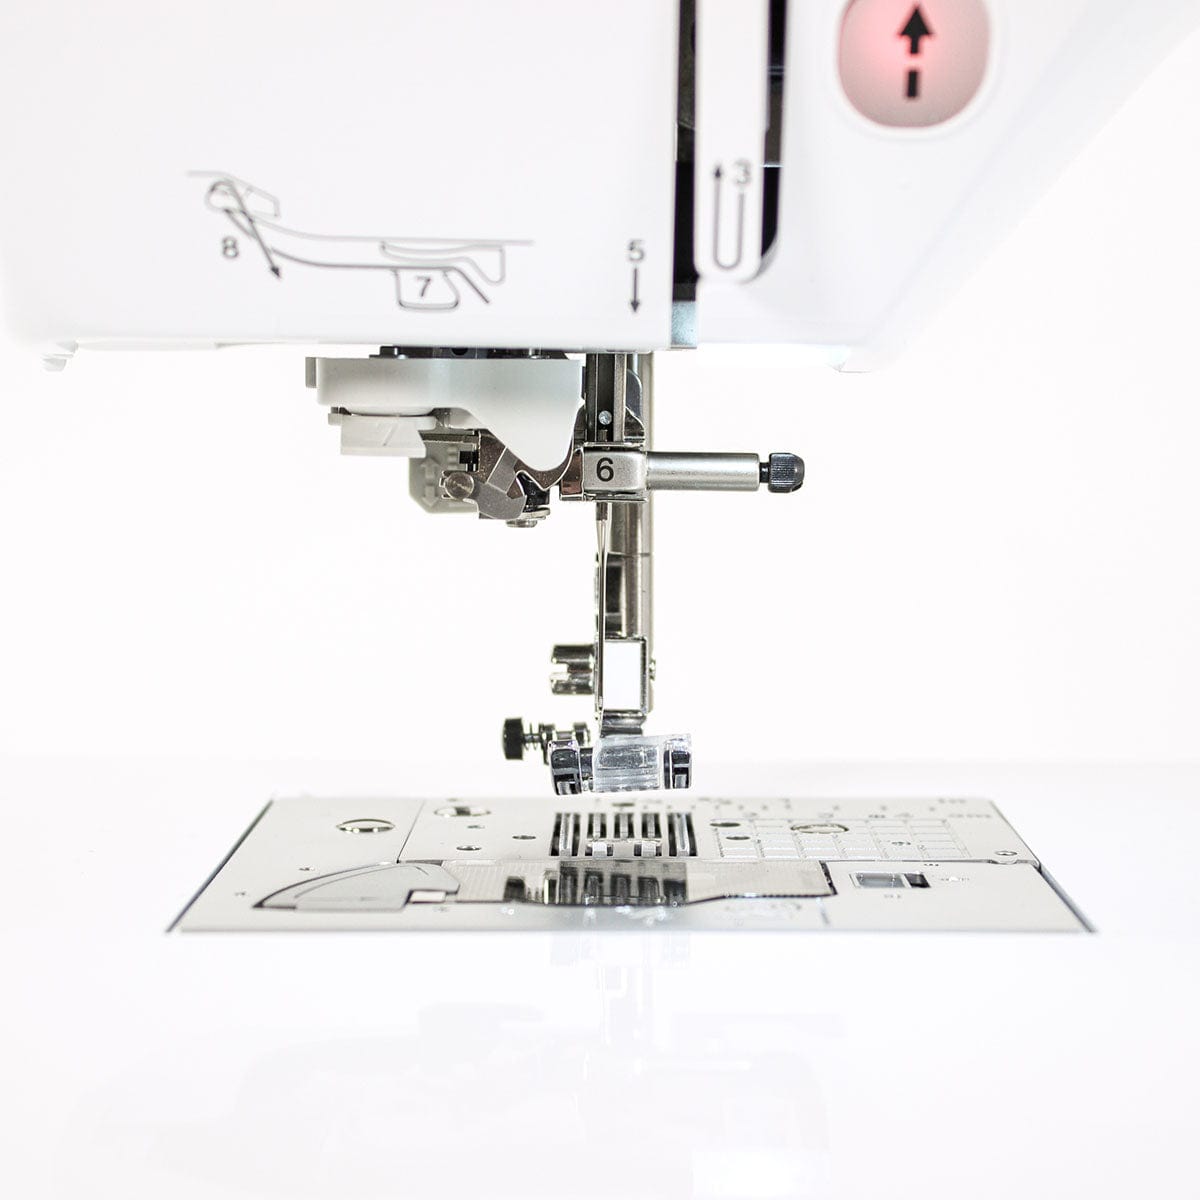 Brother Innov-is NV1800Q Sewing Machine